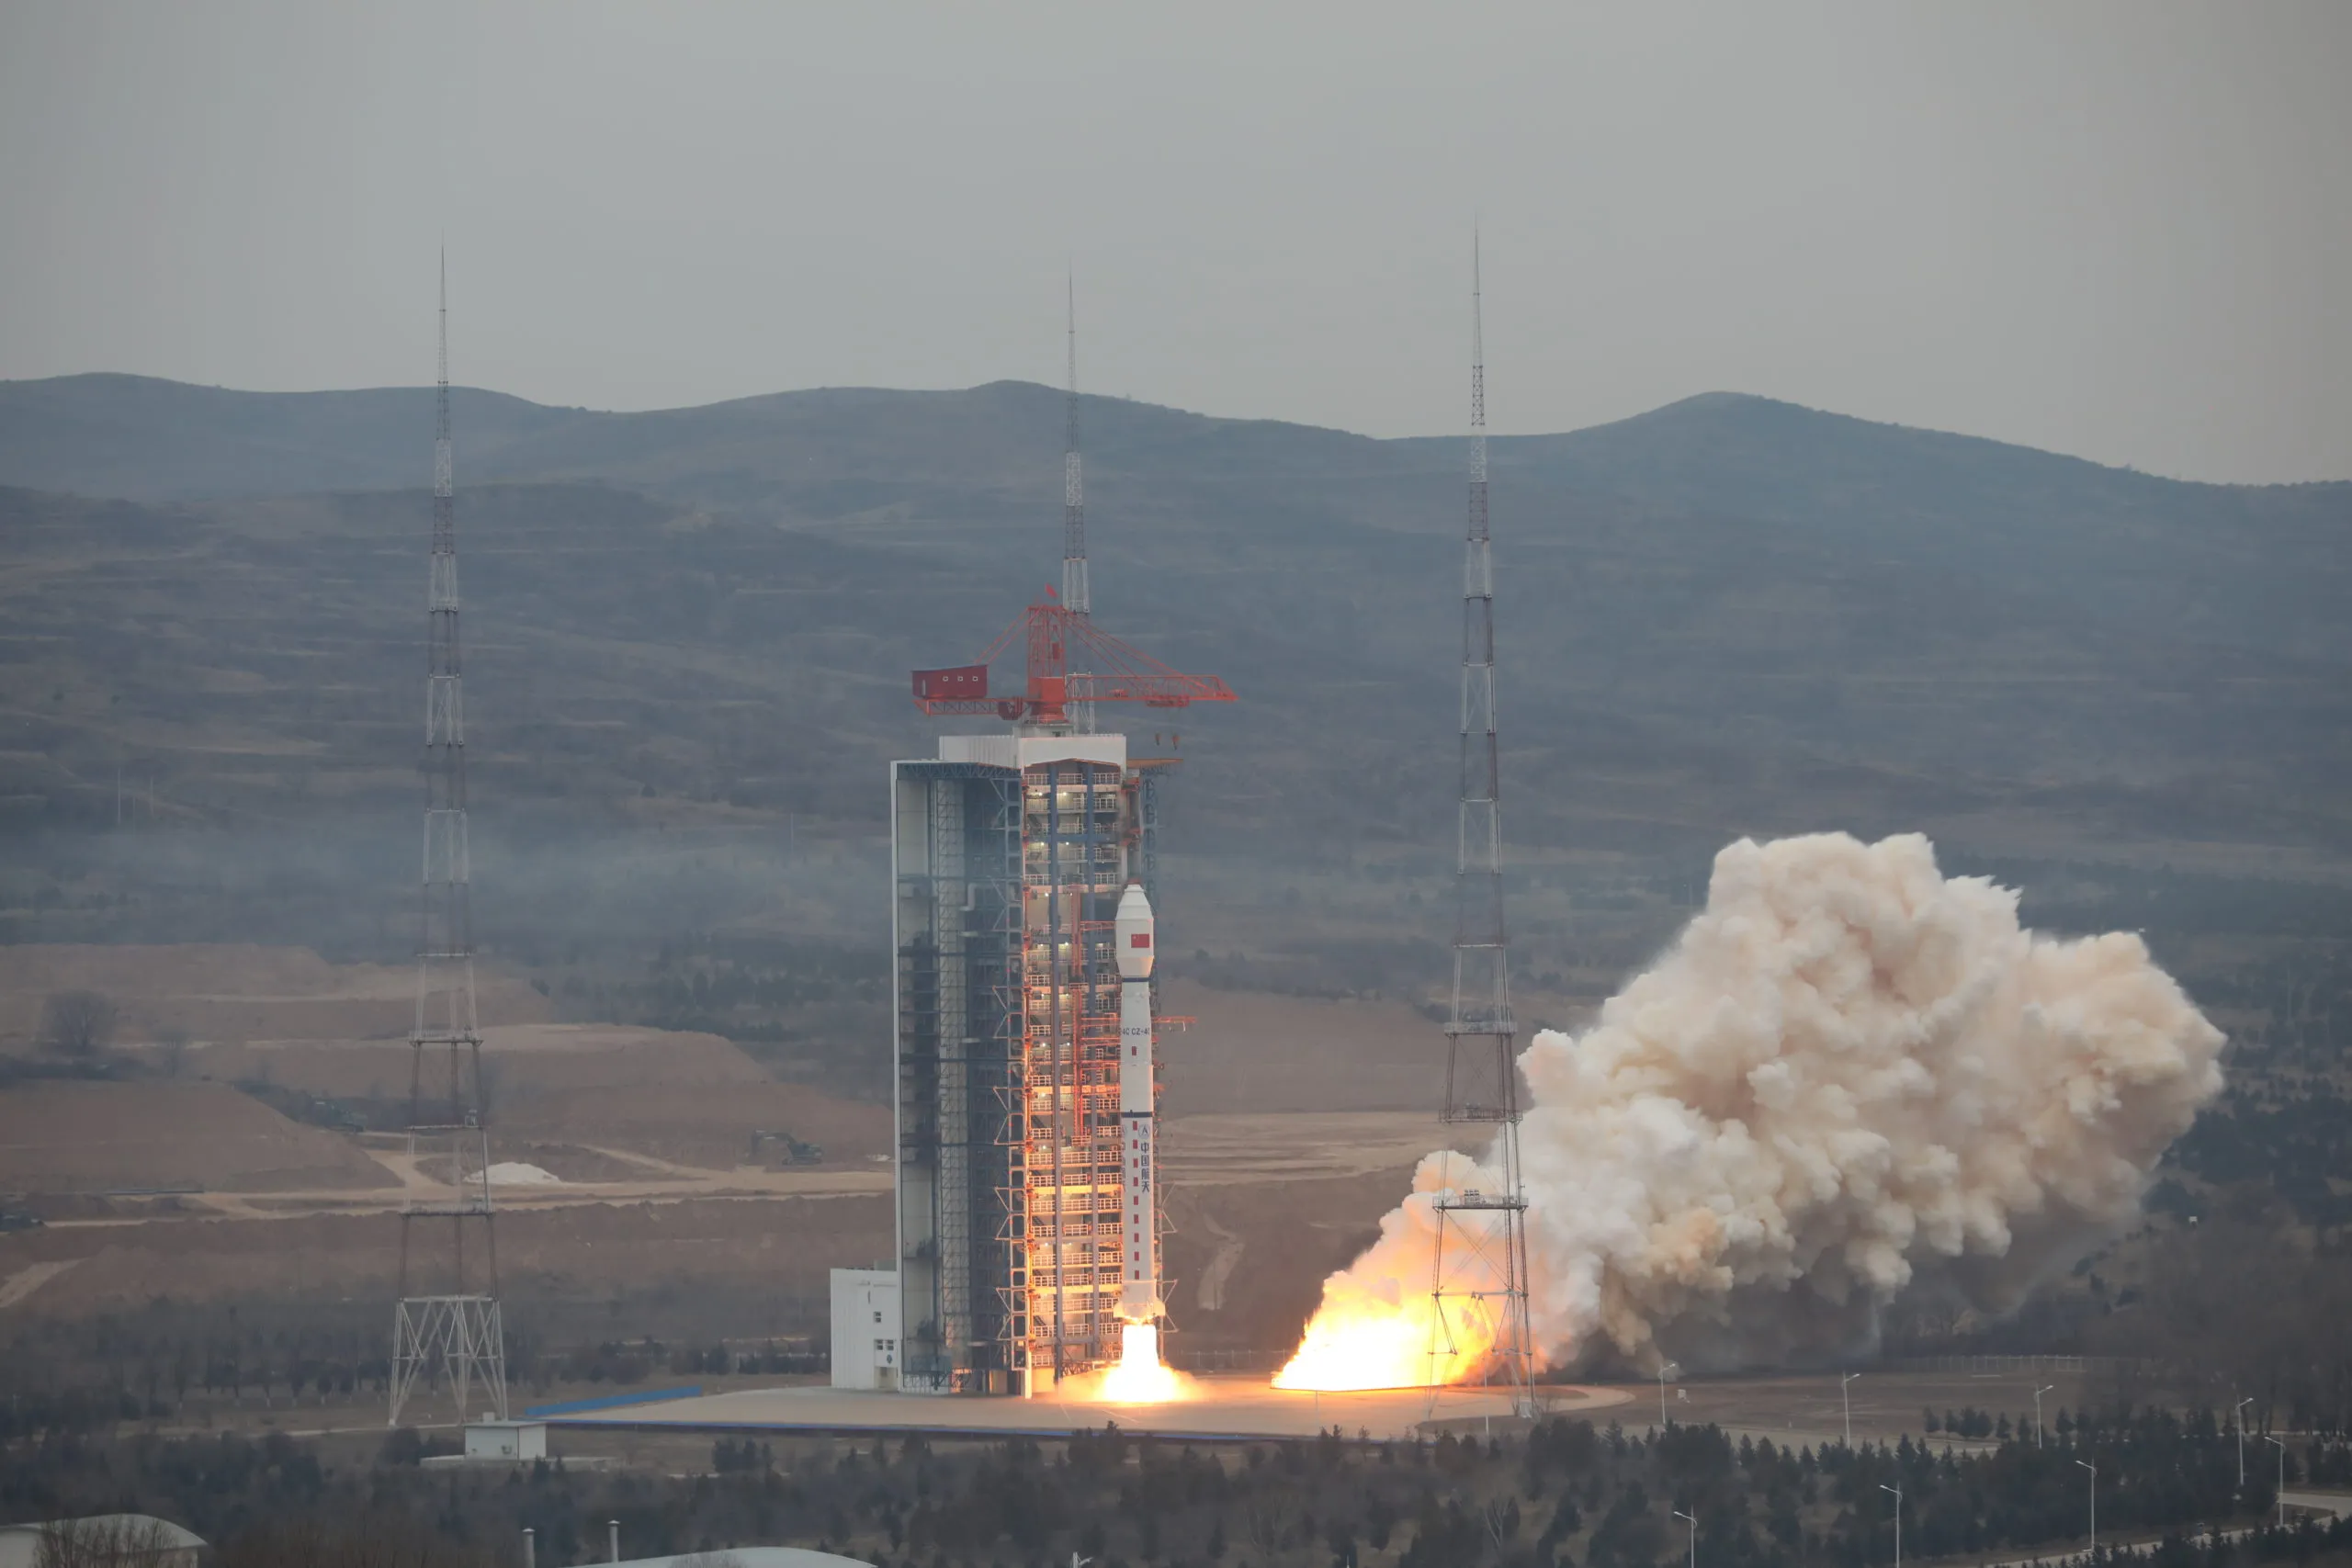 China Launches New Earth Observation Satellite into Space